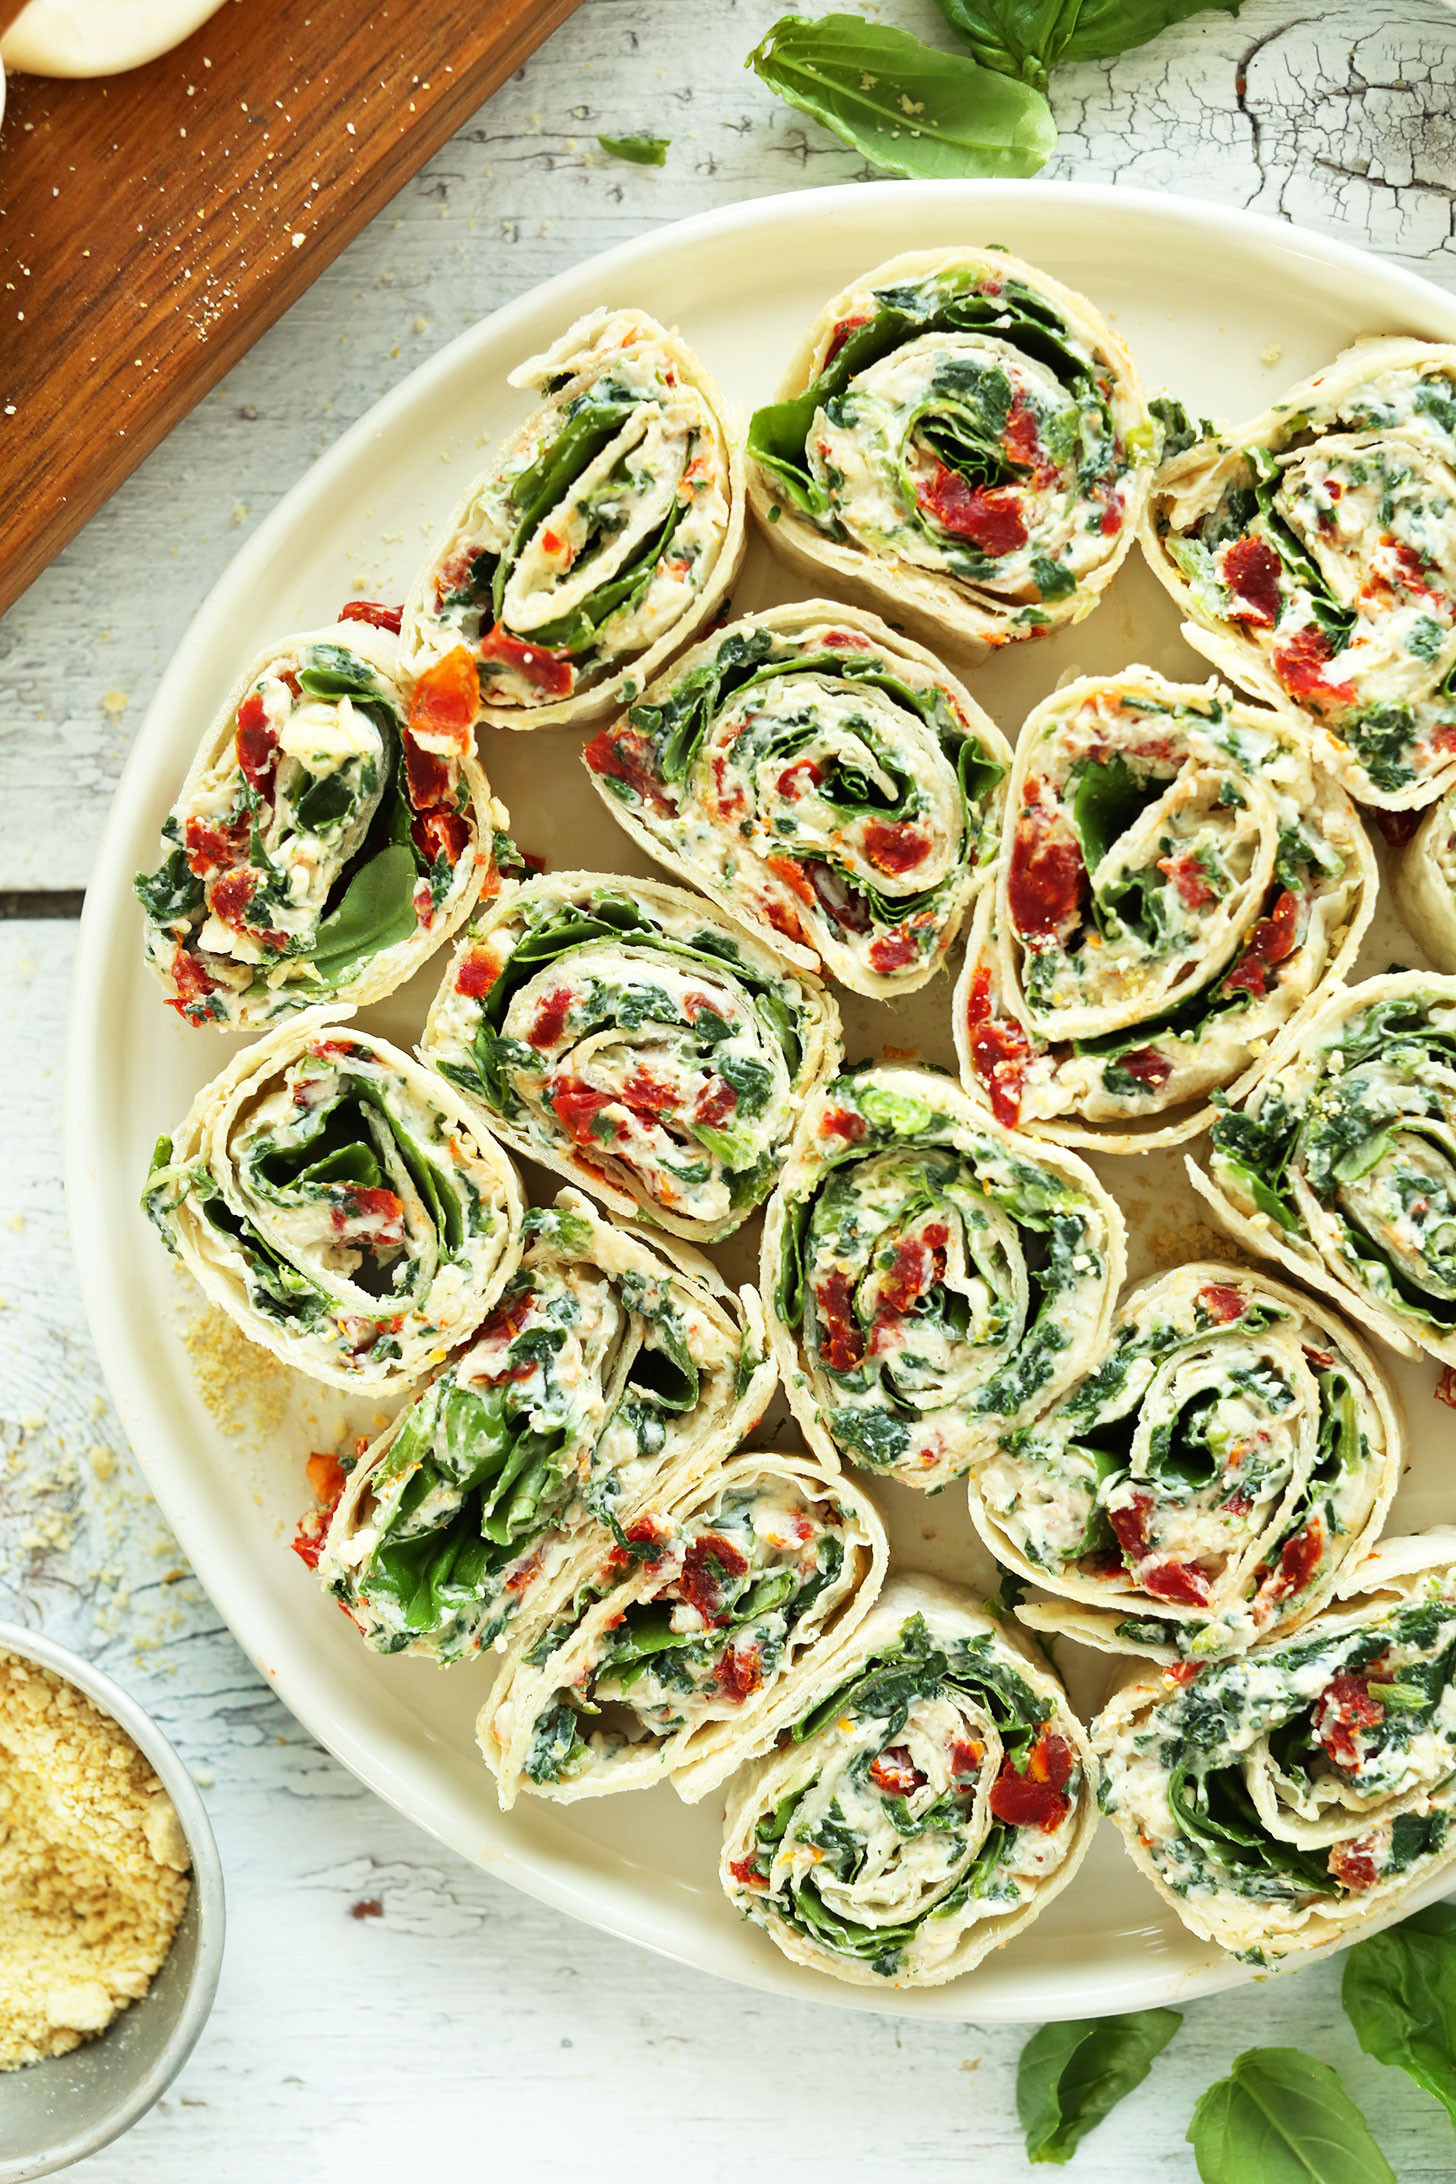 Our Most Shared Healthy Vegetarian Appetizers
 Ever